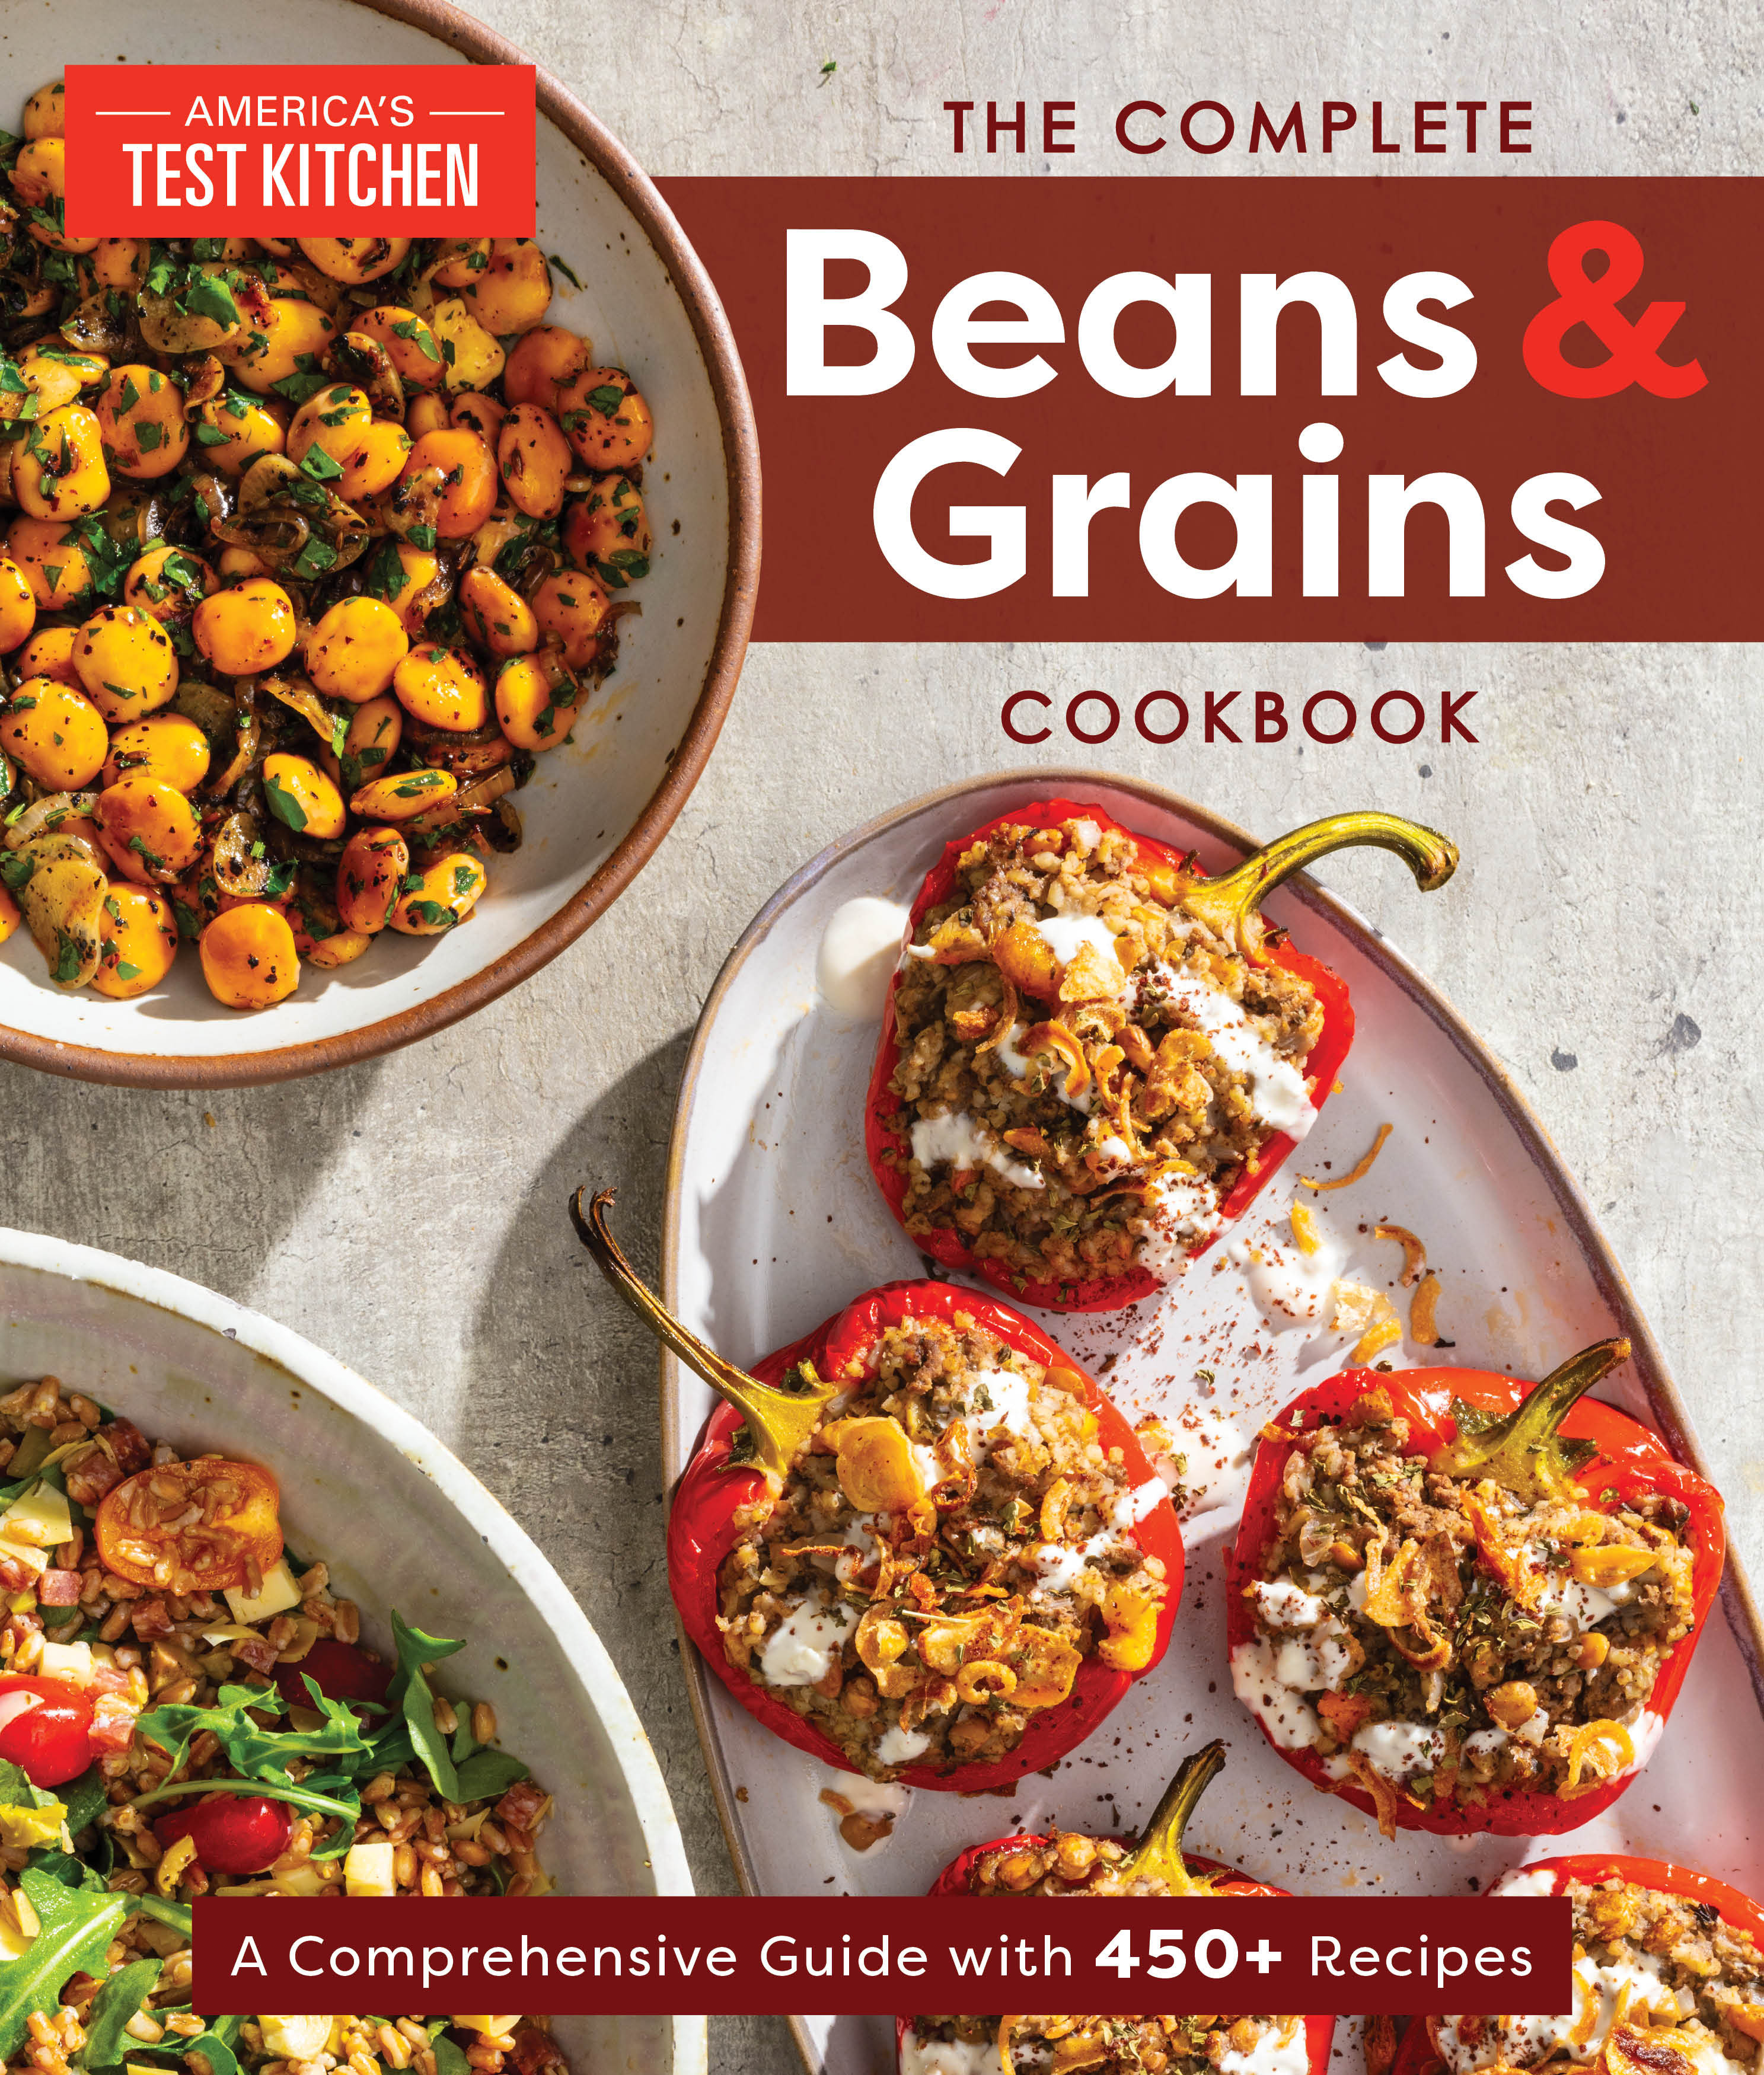 The Complete Beans and Grains Cookbook A Comprehensive Guide with 450+ Recipes cover image